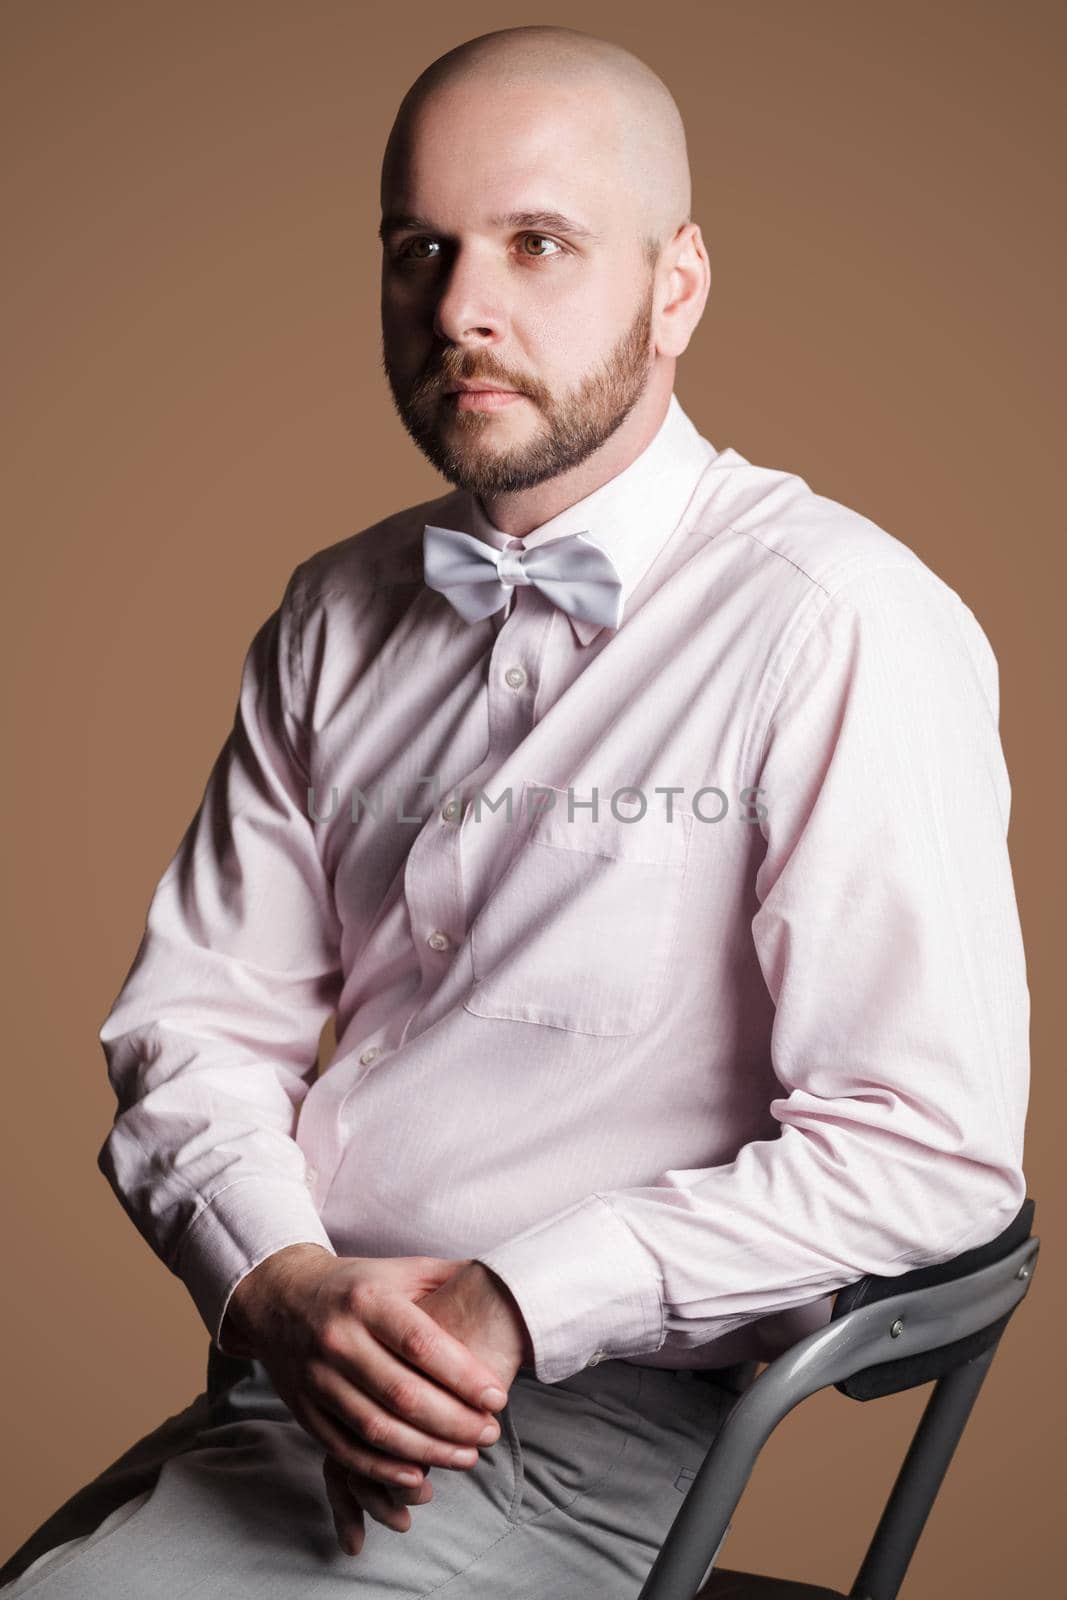 Profile side view portrait of handsome bearded bald man in light pink shirt and white bow, sitting on chair and looking away with thoughtful serious face. studio shot, isolated on brown background.